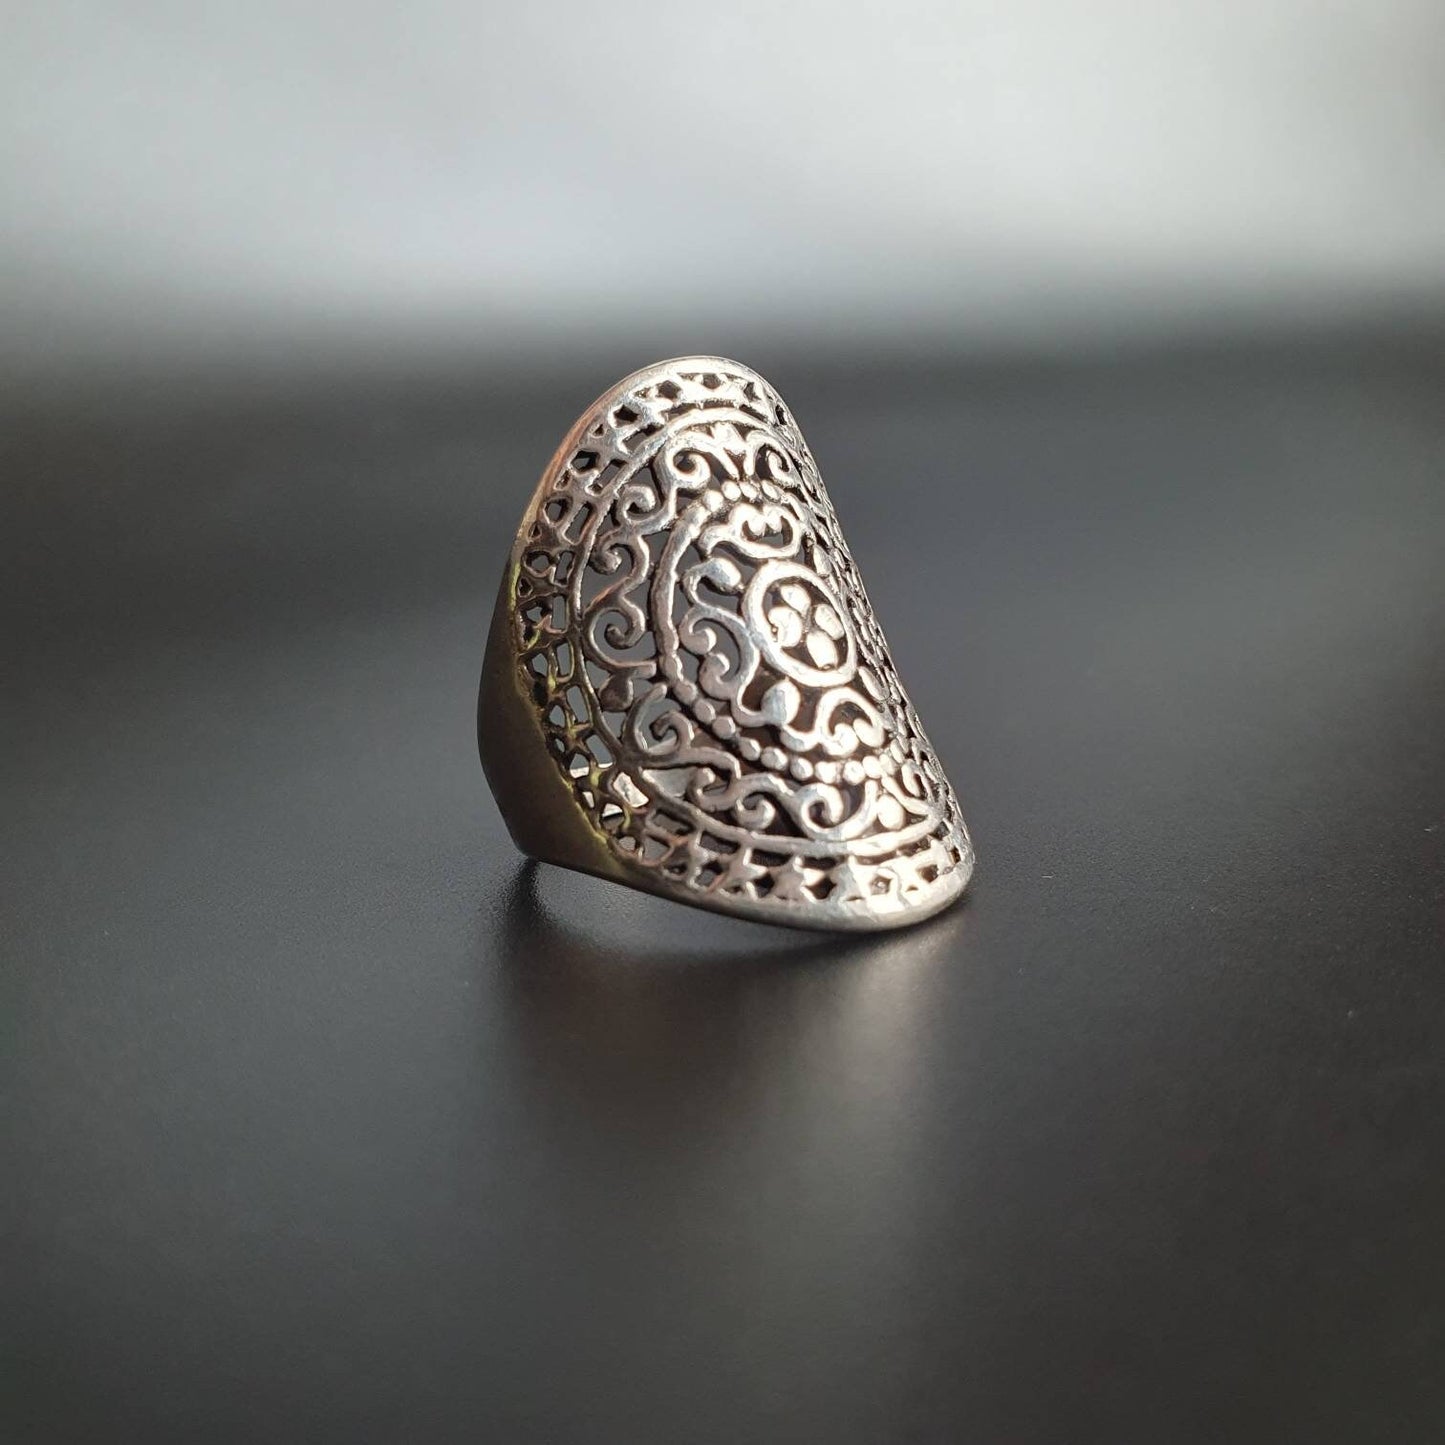 Celtic Ring,fantasy ring, sterling silver ring, statement ring, silver ring, filigree ring, thumb ring, chunky ring,boho jewelry, gifts